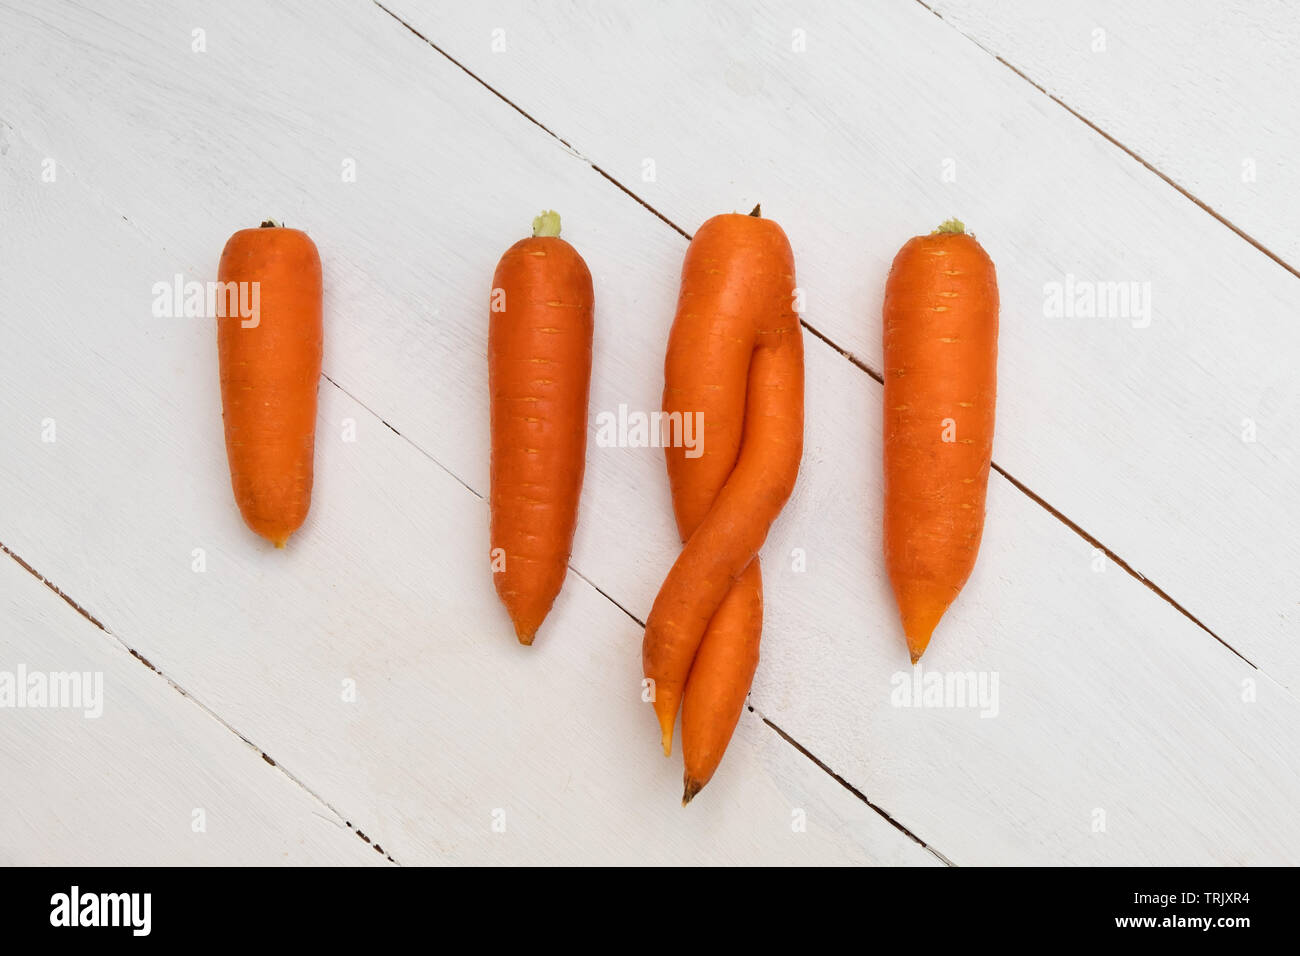 Carrot that looks like a person with their legs crossed. : r